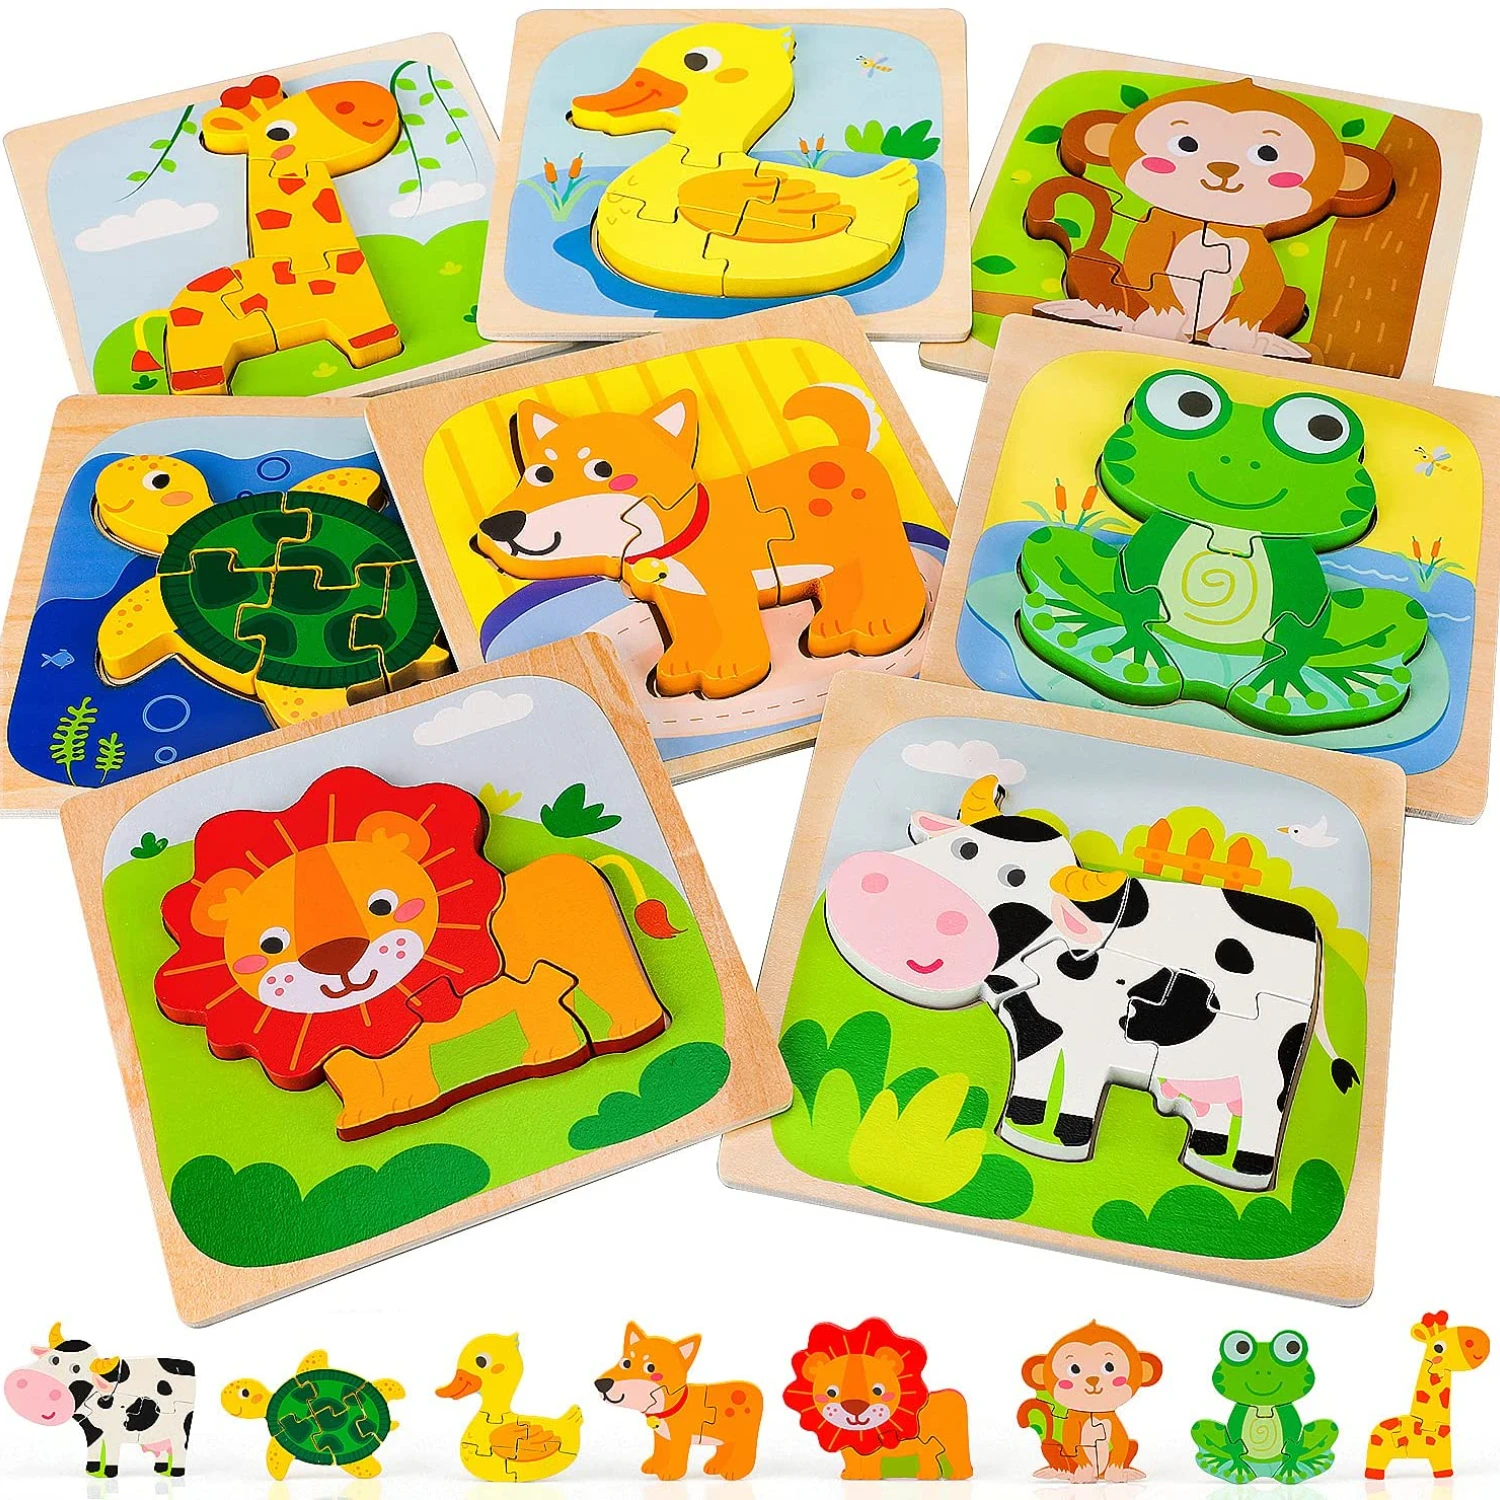 Wooden Puzzles for Toddlers and Kids 1 2 3 Year Old Boy and Girl Children Toys 